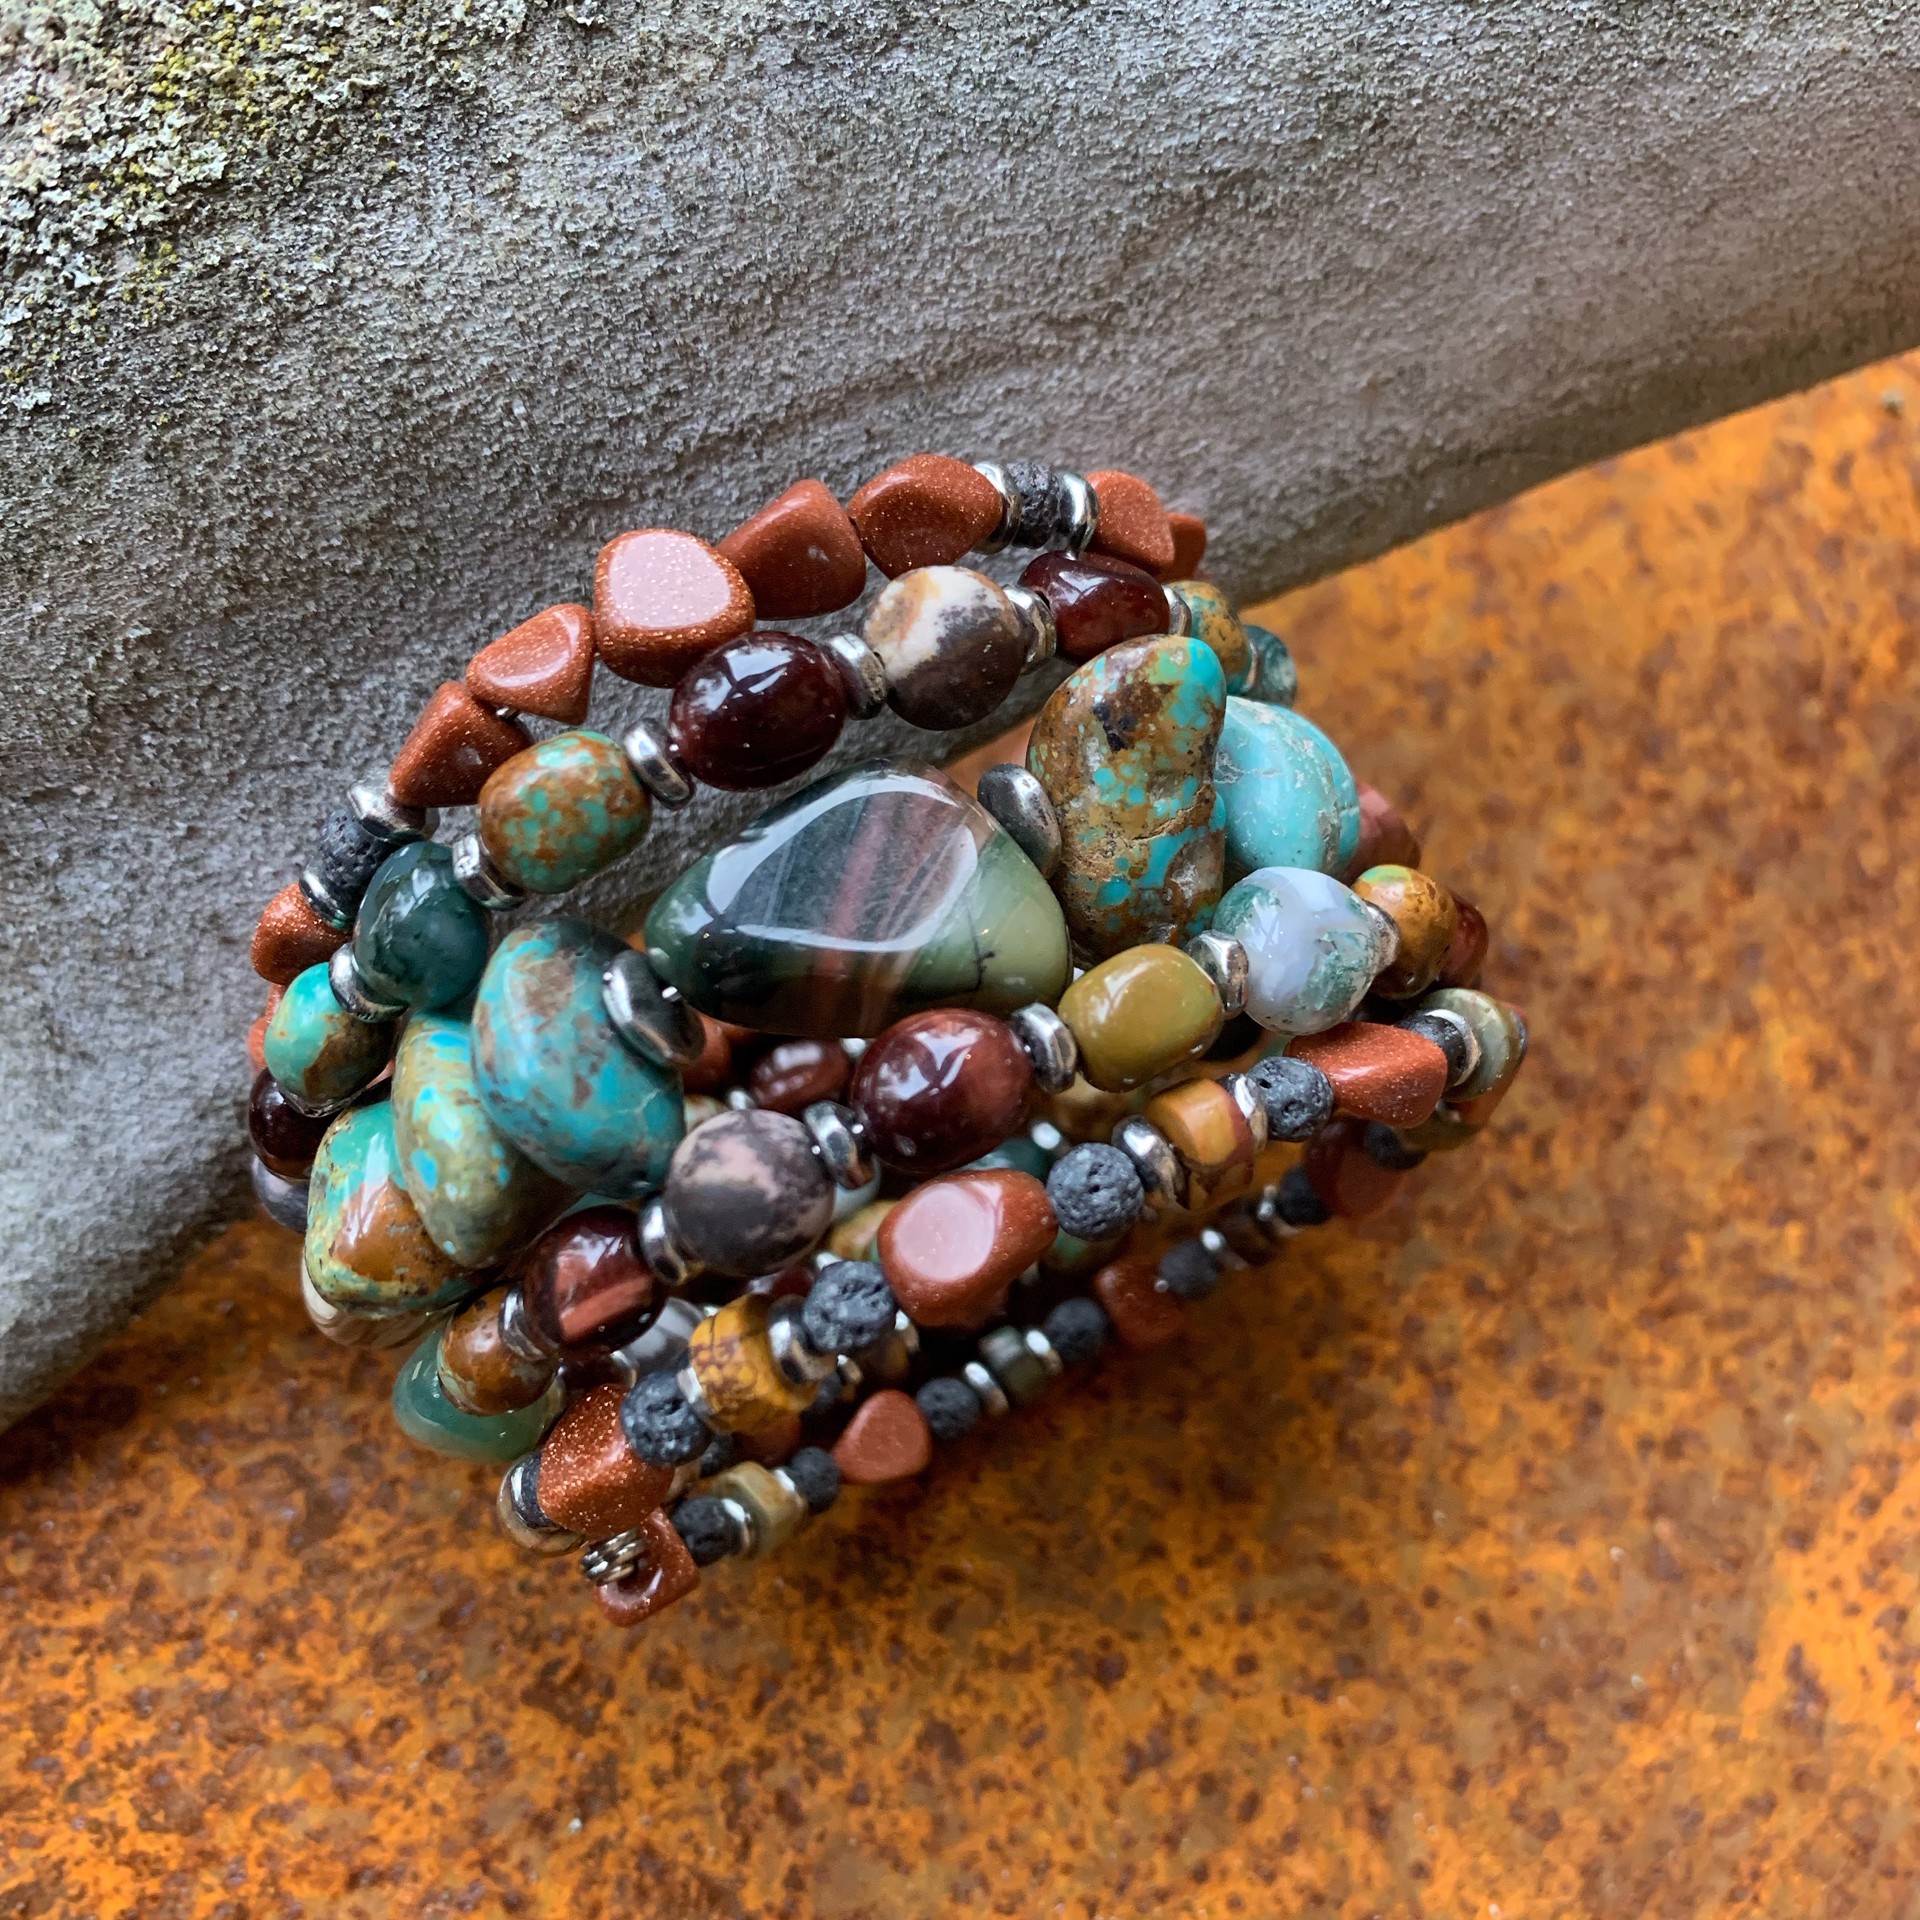 K539 Jasper and Tuquoise With Large Center Stones 5 Wrap by Kelly Ormsby